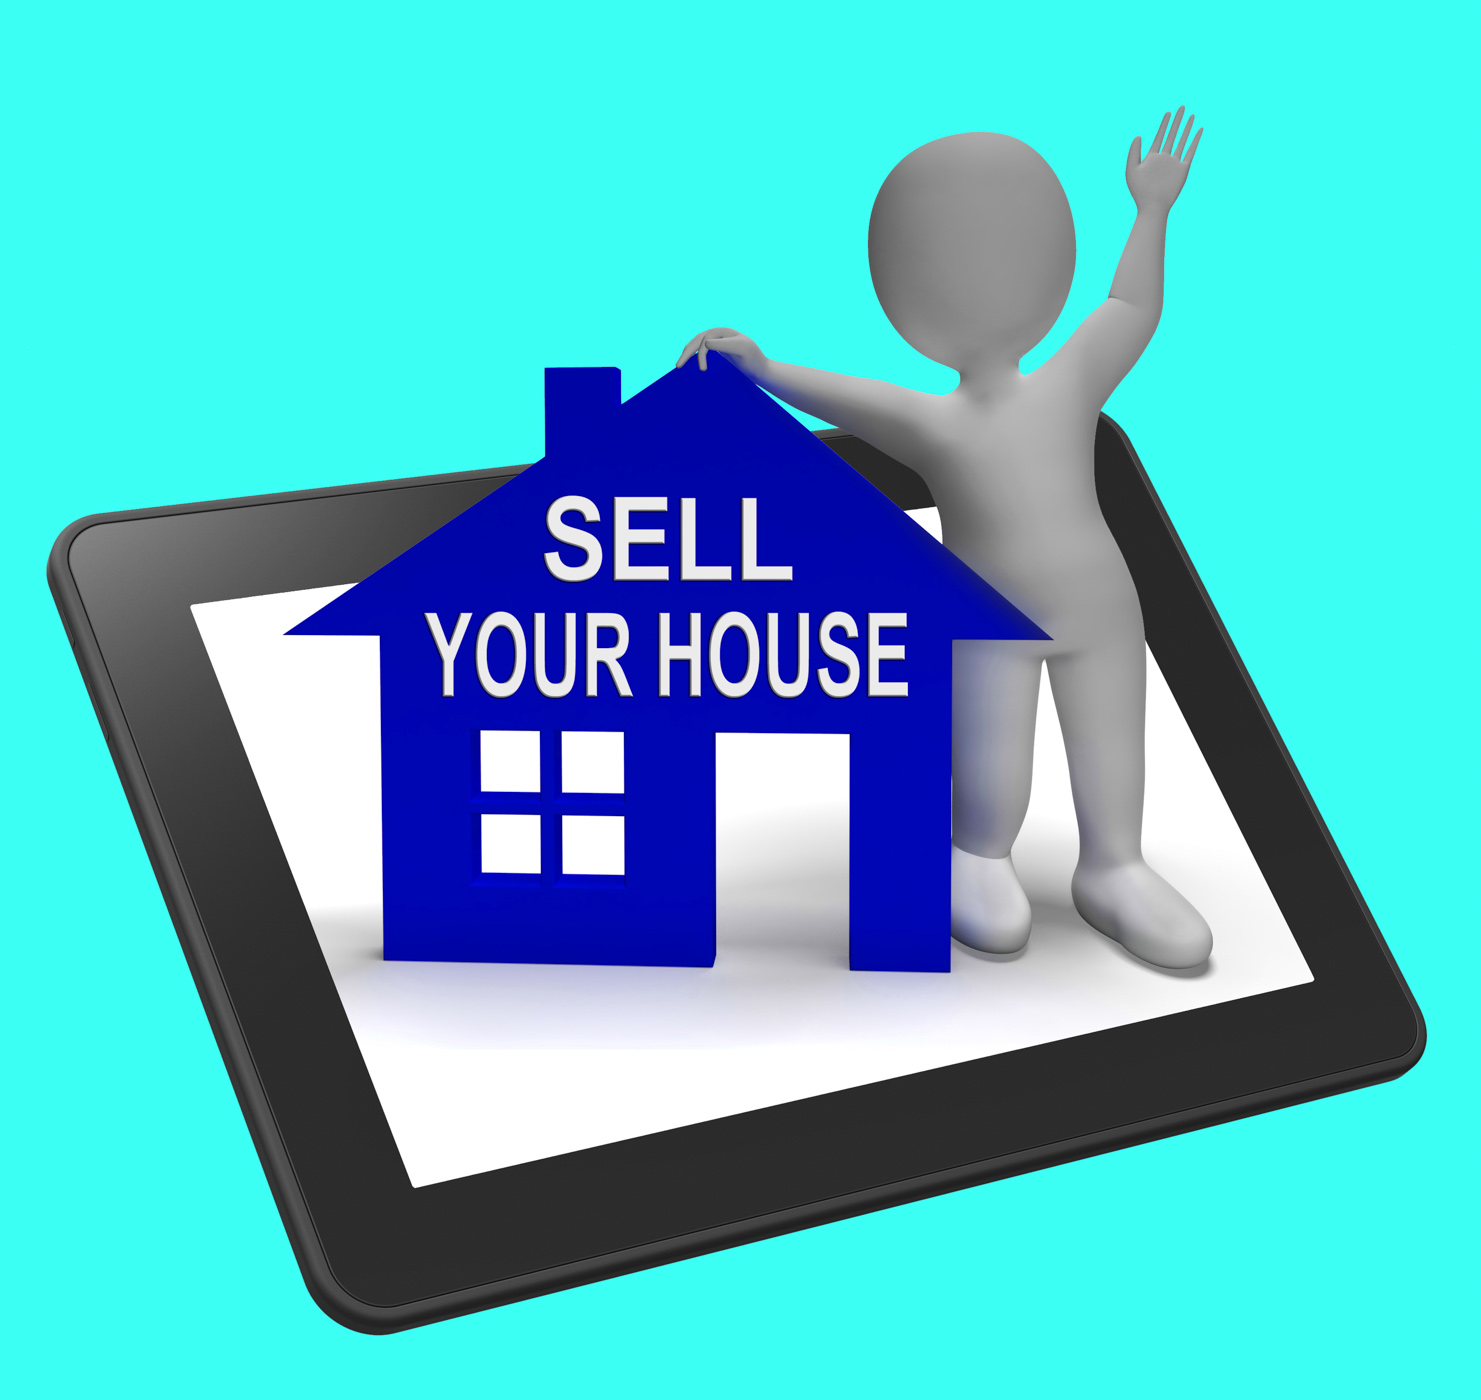 Sell your house home tablet shows putting property on the market photo